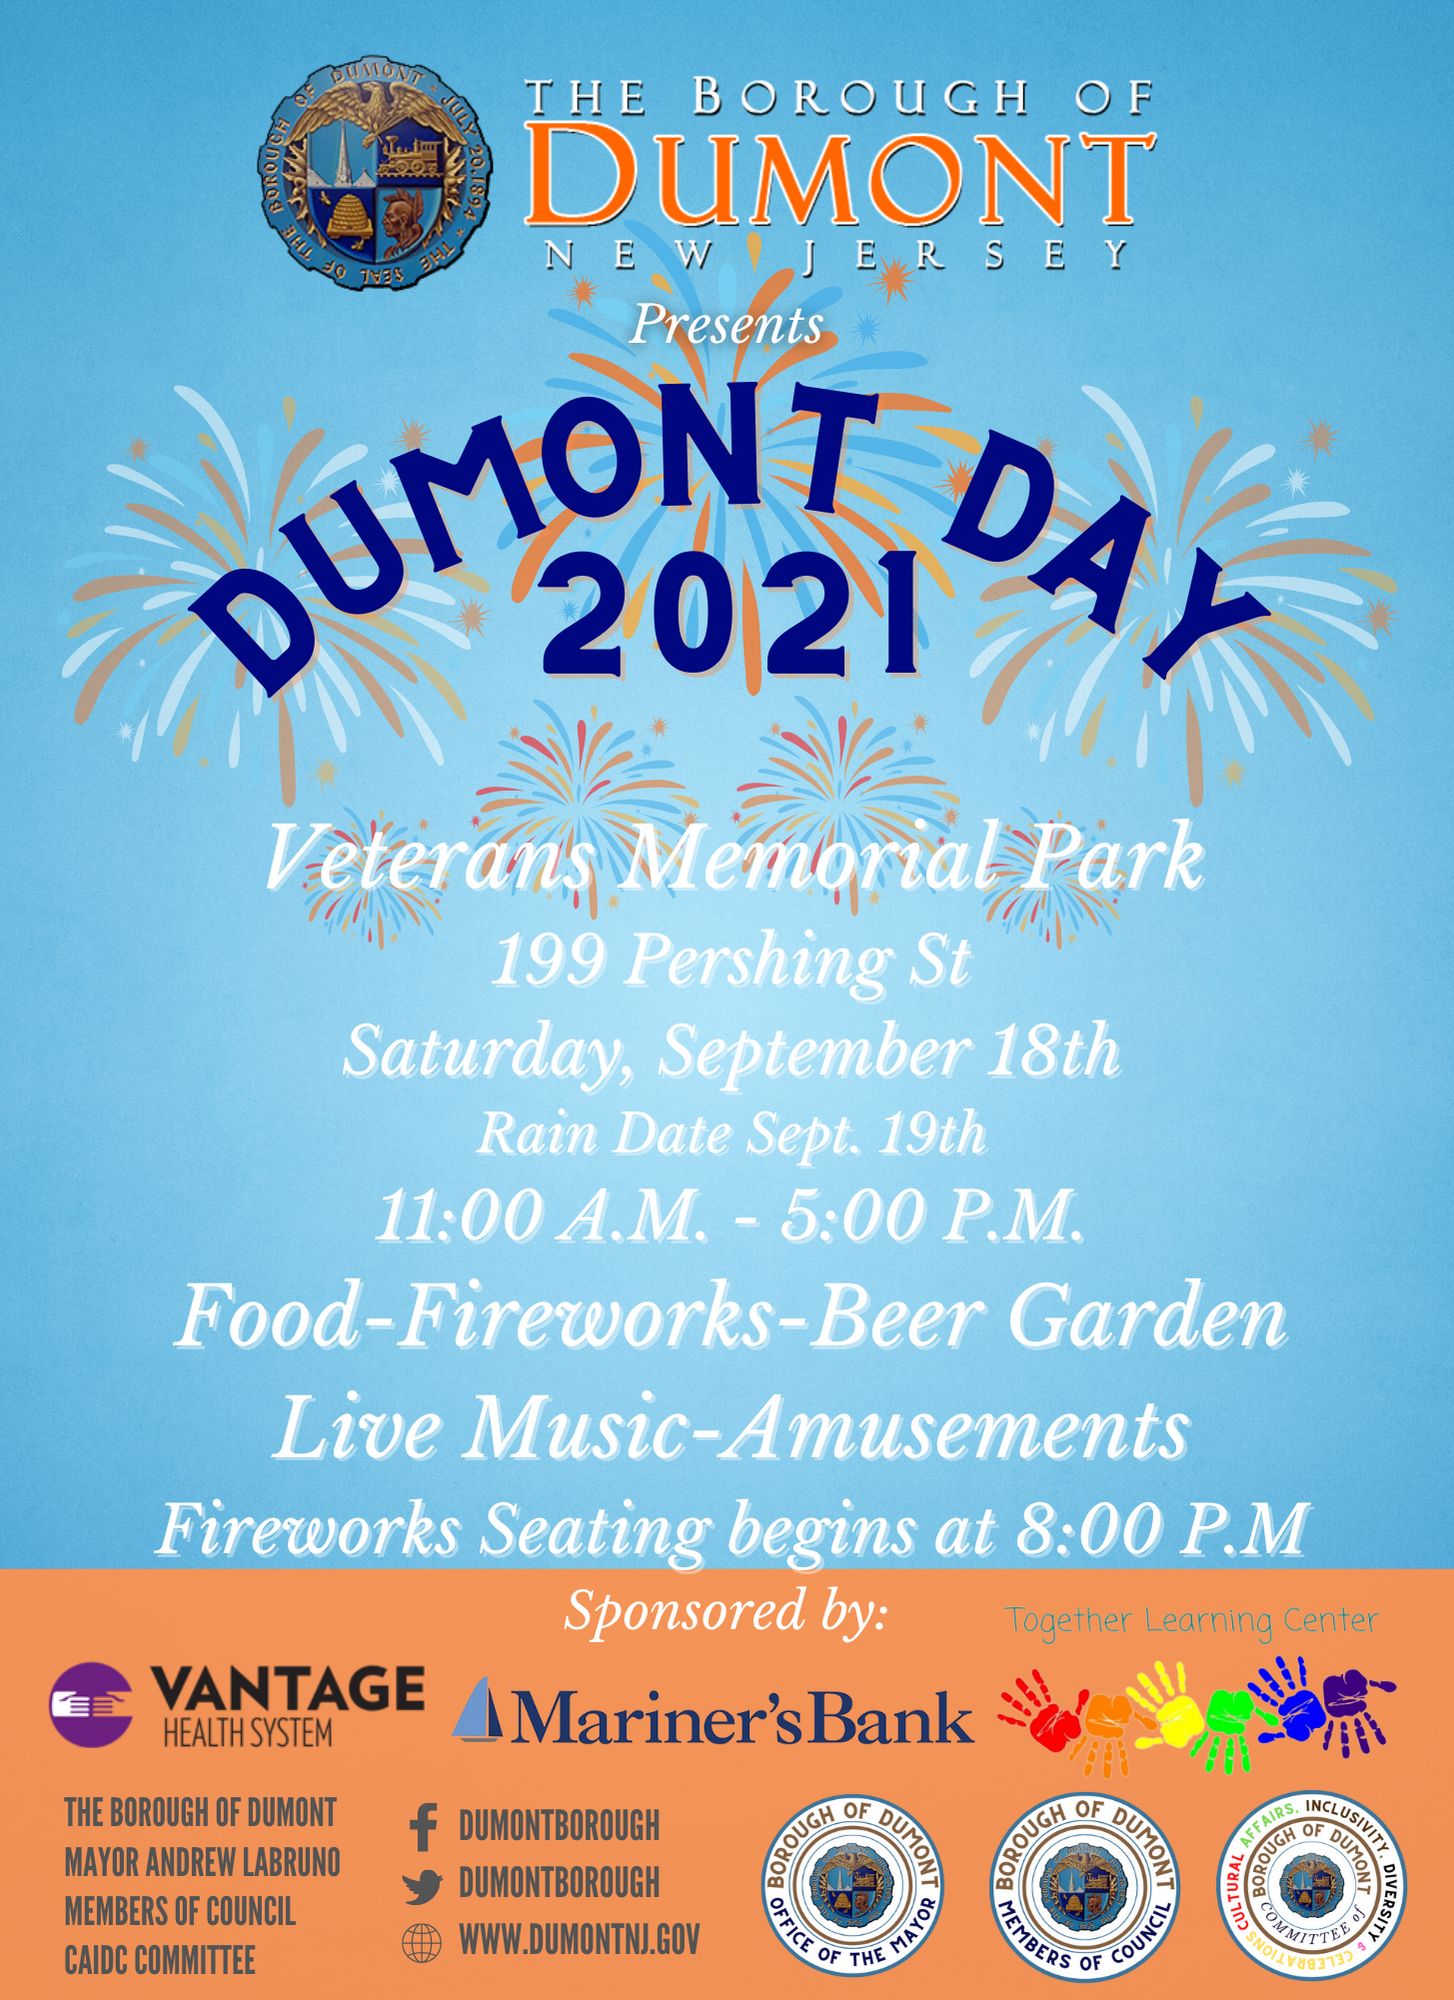 community-news-events-in-dumont-nj